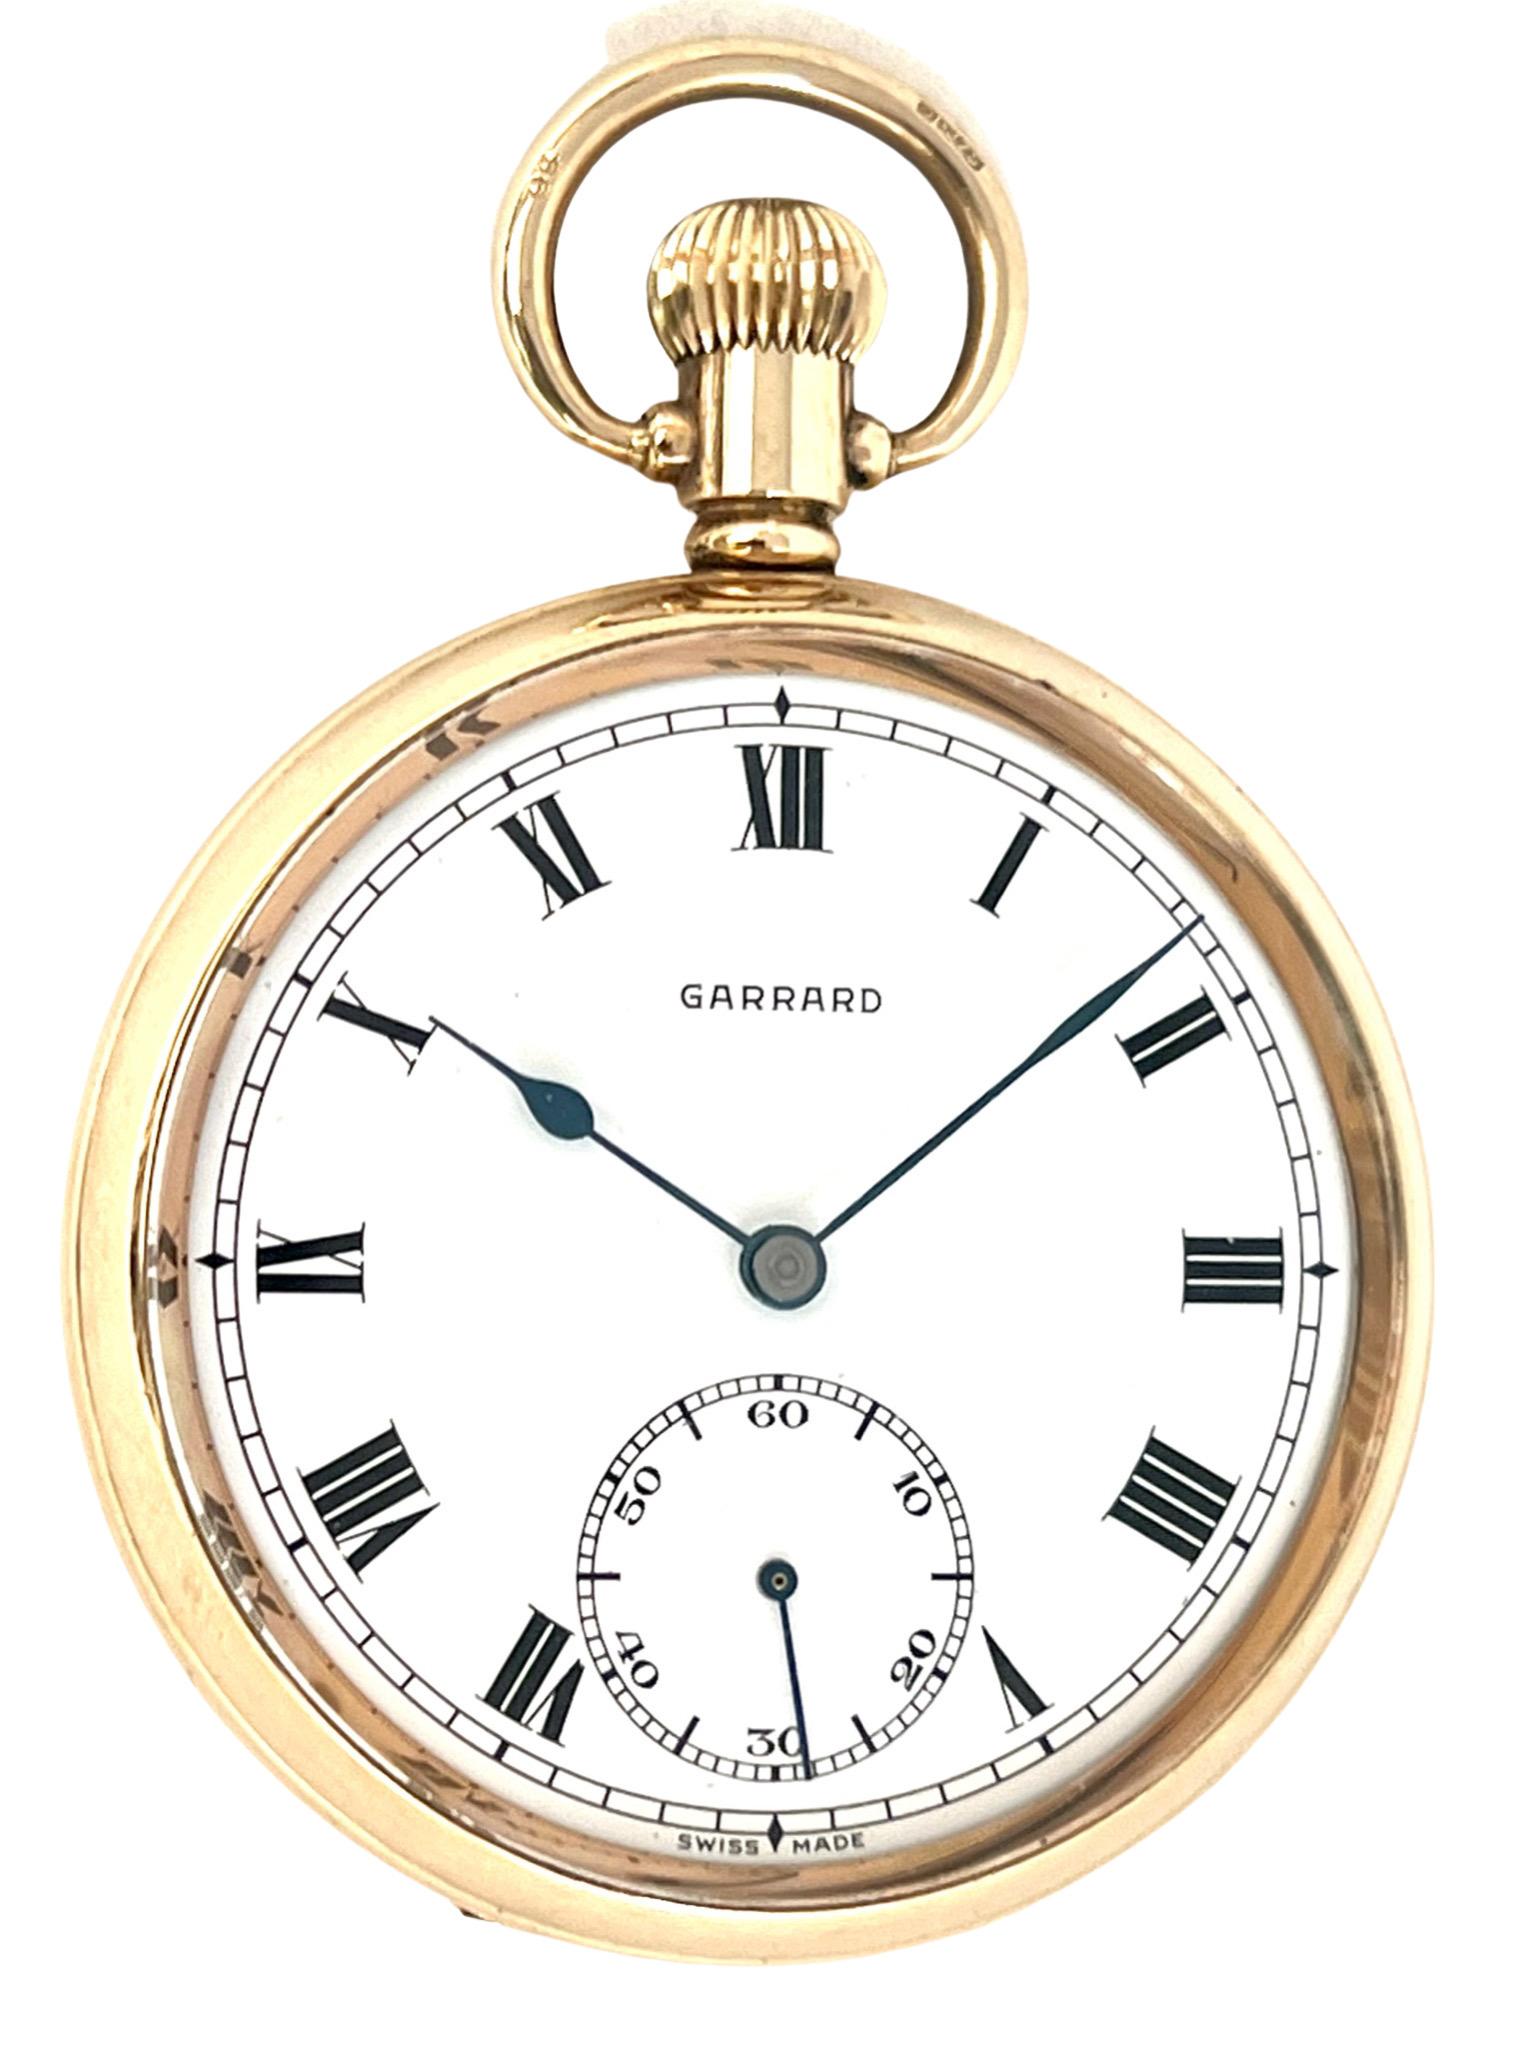 A handsome 9 Carat Solid Gold Open Faced Pocket Watch, retailed By Garrards, The Jewellers, London. The movement is by Burne Watch Company, Switzerland with Birmingham Hallmark 1965.

The solid gold case has a bevelled glass front and a crisp white